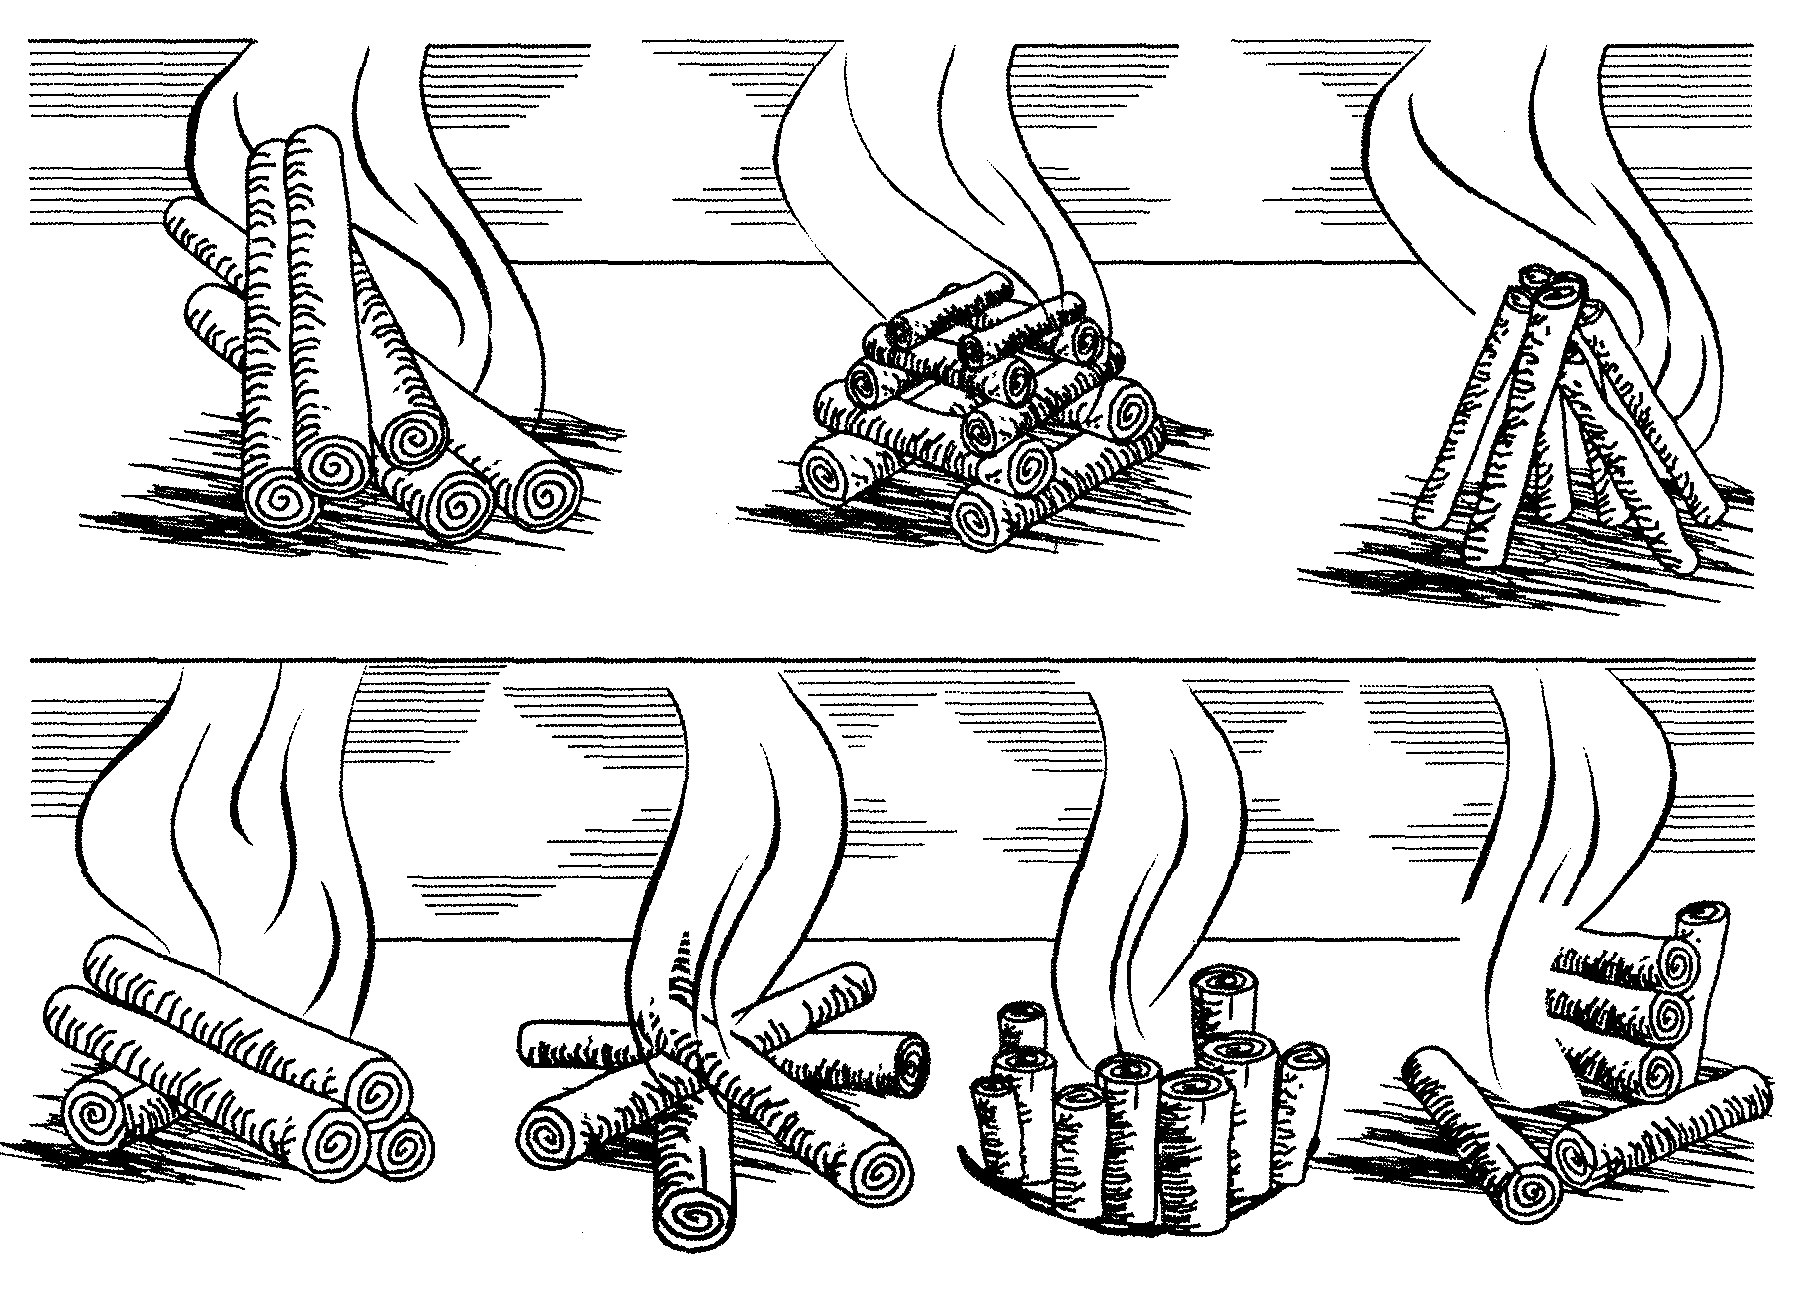 Types of fires